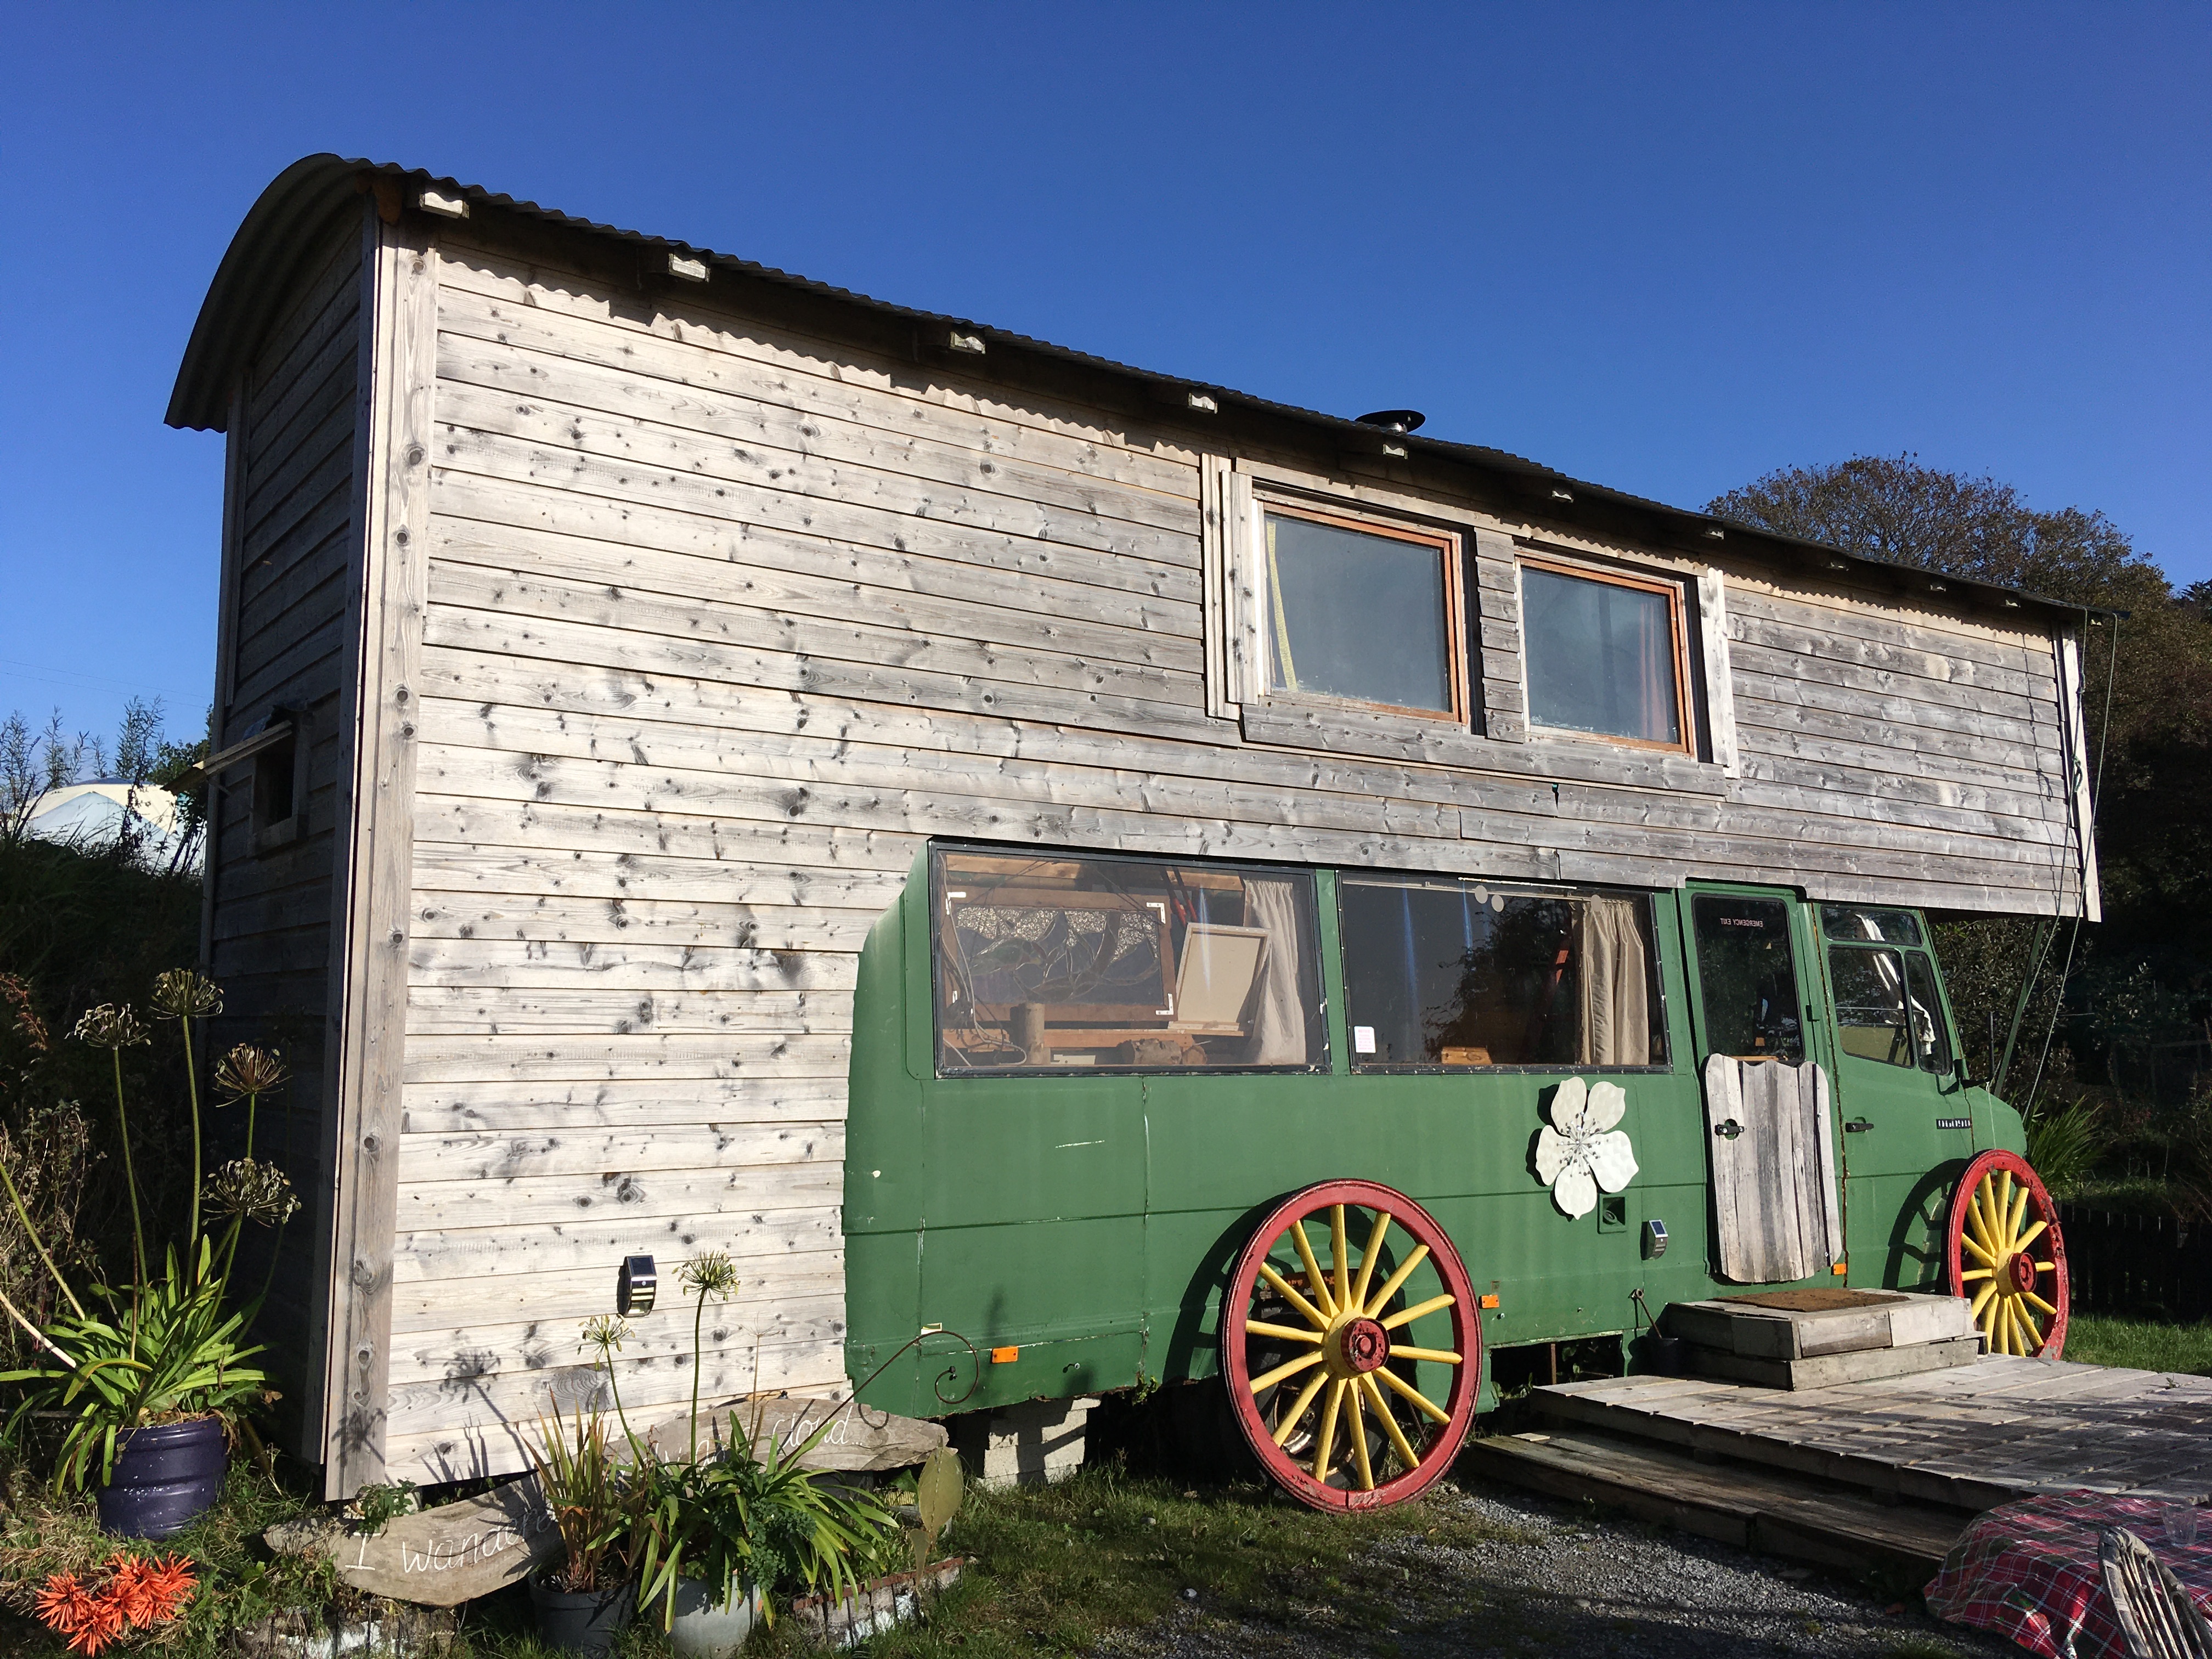 Wanderly Wagon, Inch Hideaway, Eco Camp - Campervans/Motorhomes for Rent in  Whitegate, County Cork, Ireland